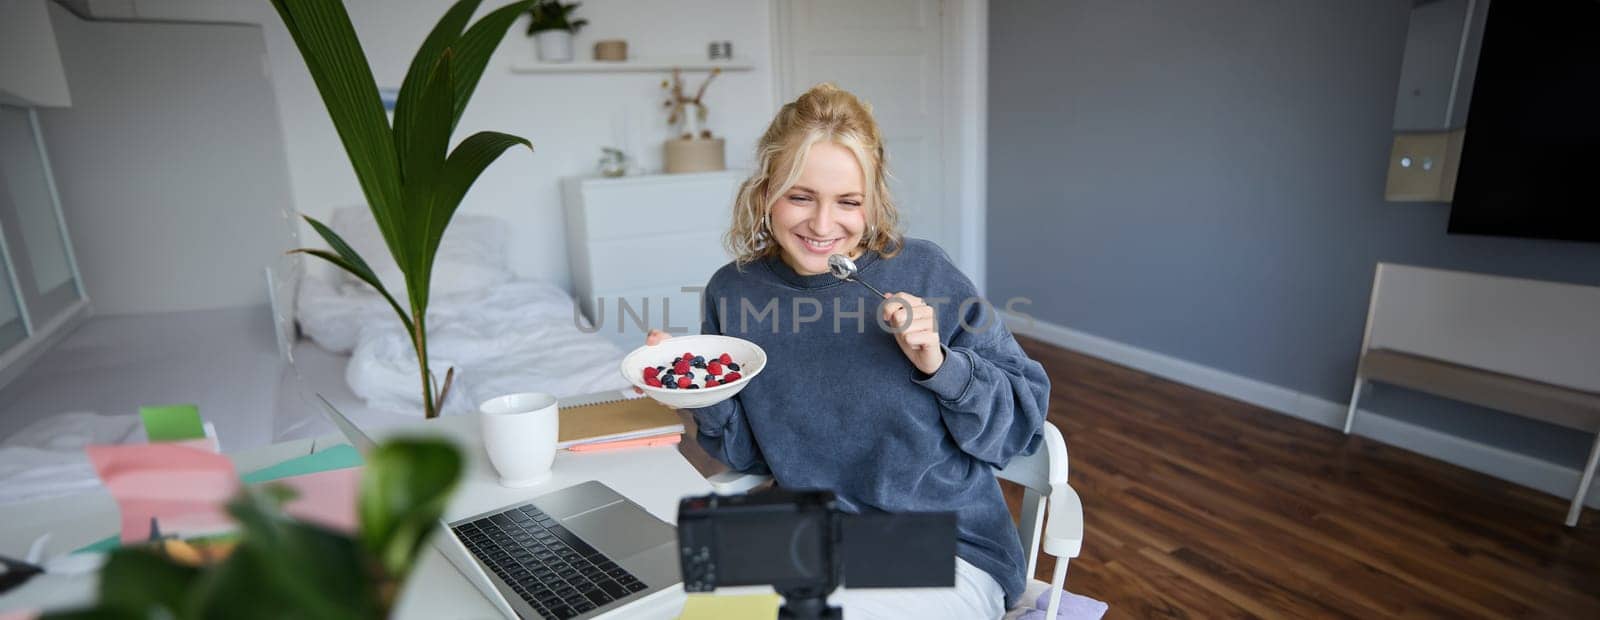 Portrait of smiling, candid young woman, content creator, eating bowl of dessert and looking at digital camera, recording vlog for followers on social media.